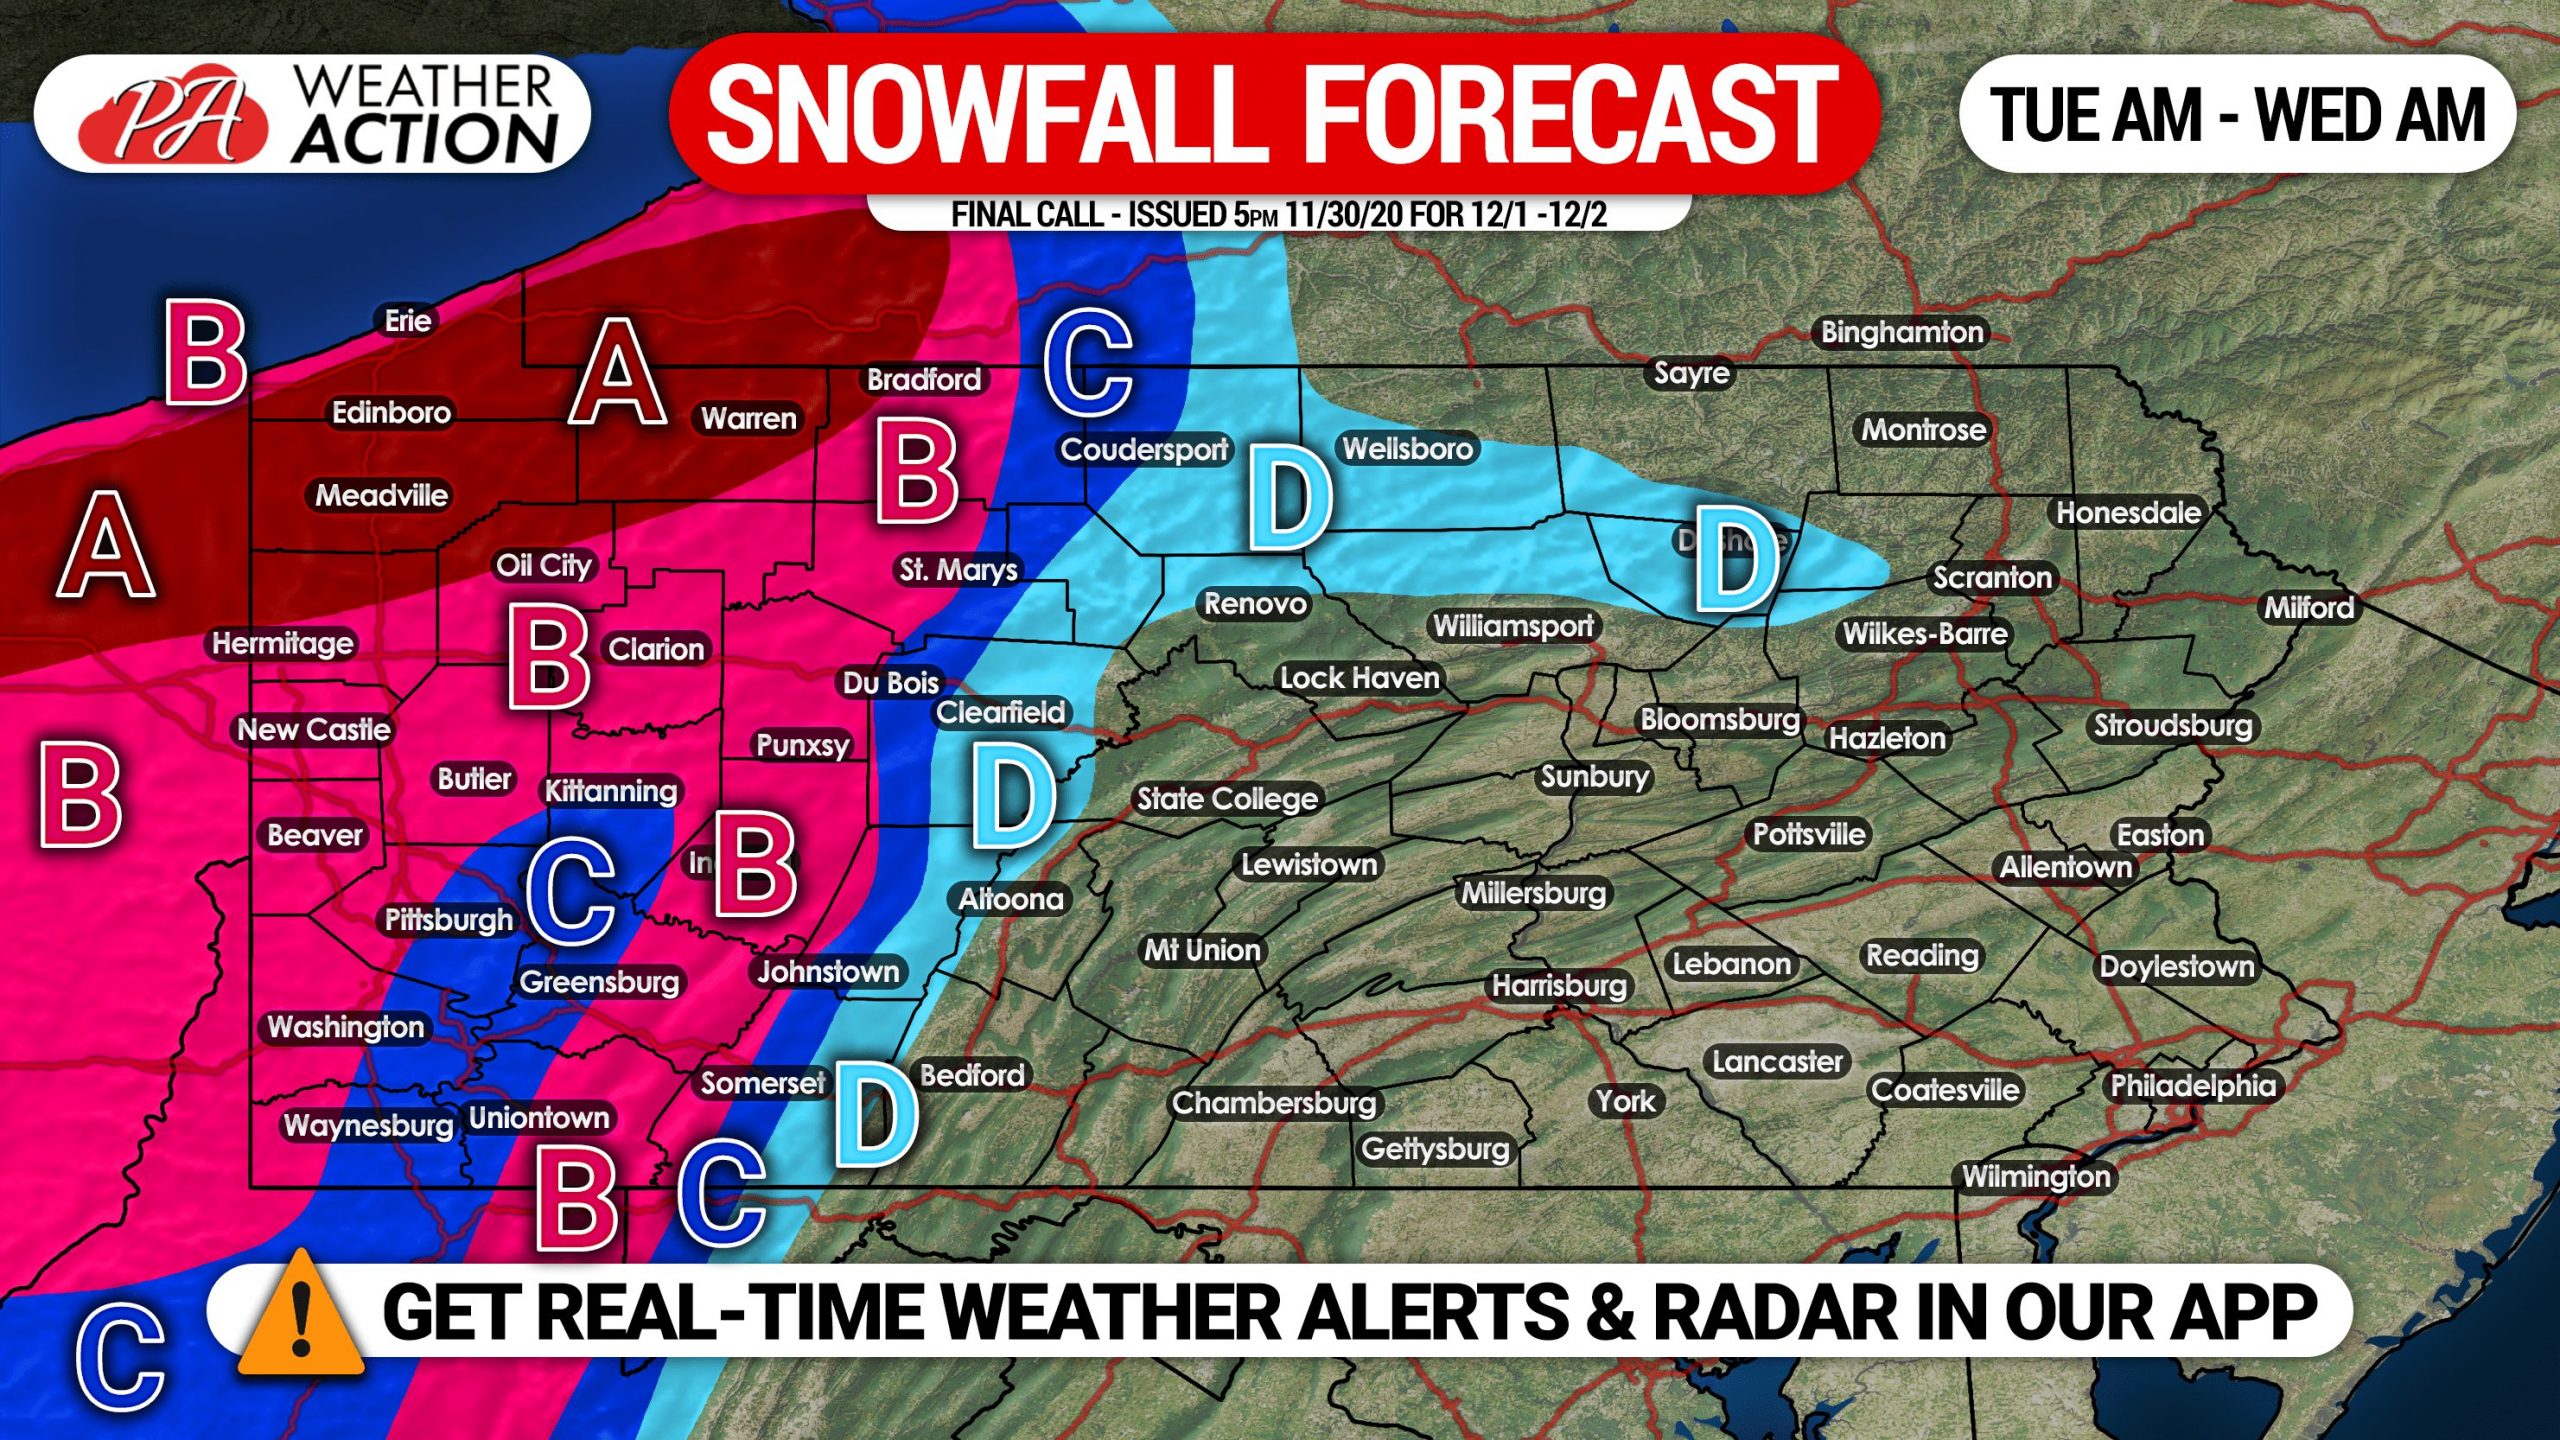 Final Call Snowfall Forecast for Tuesday's Western PA Snowstorm PA